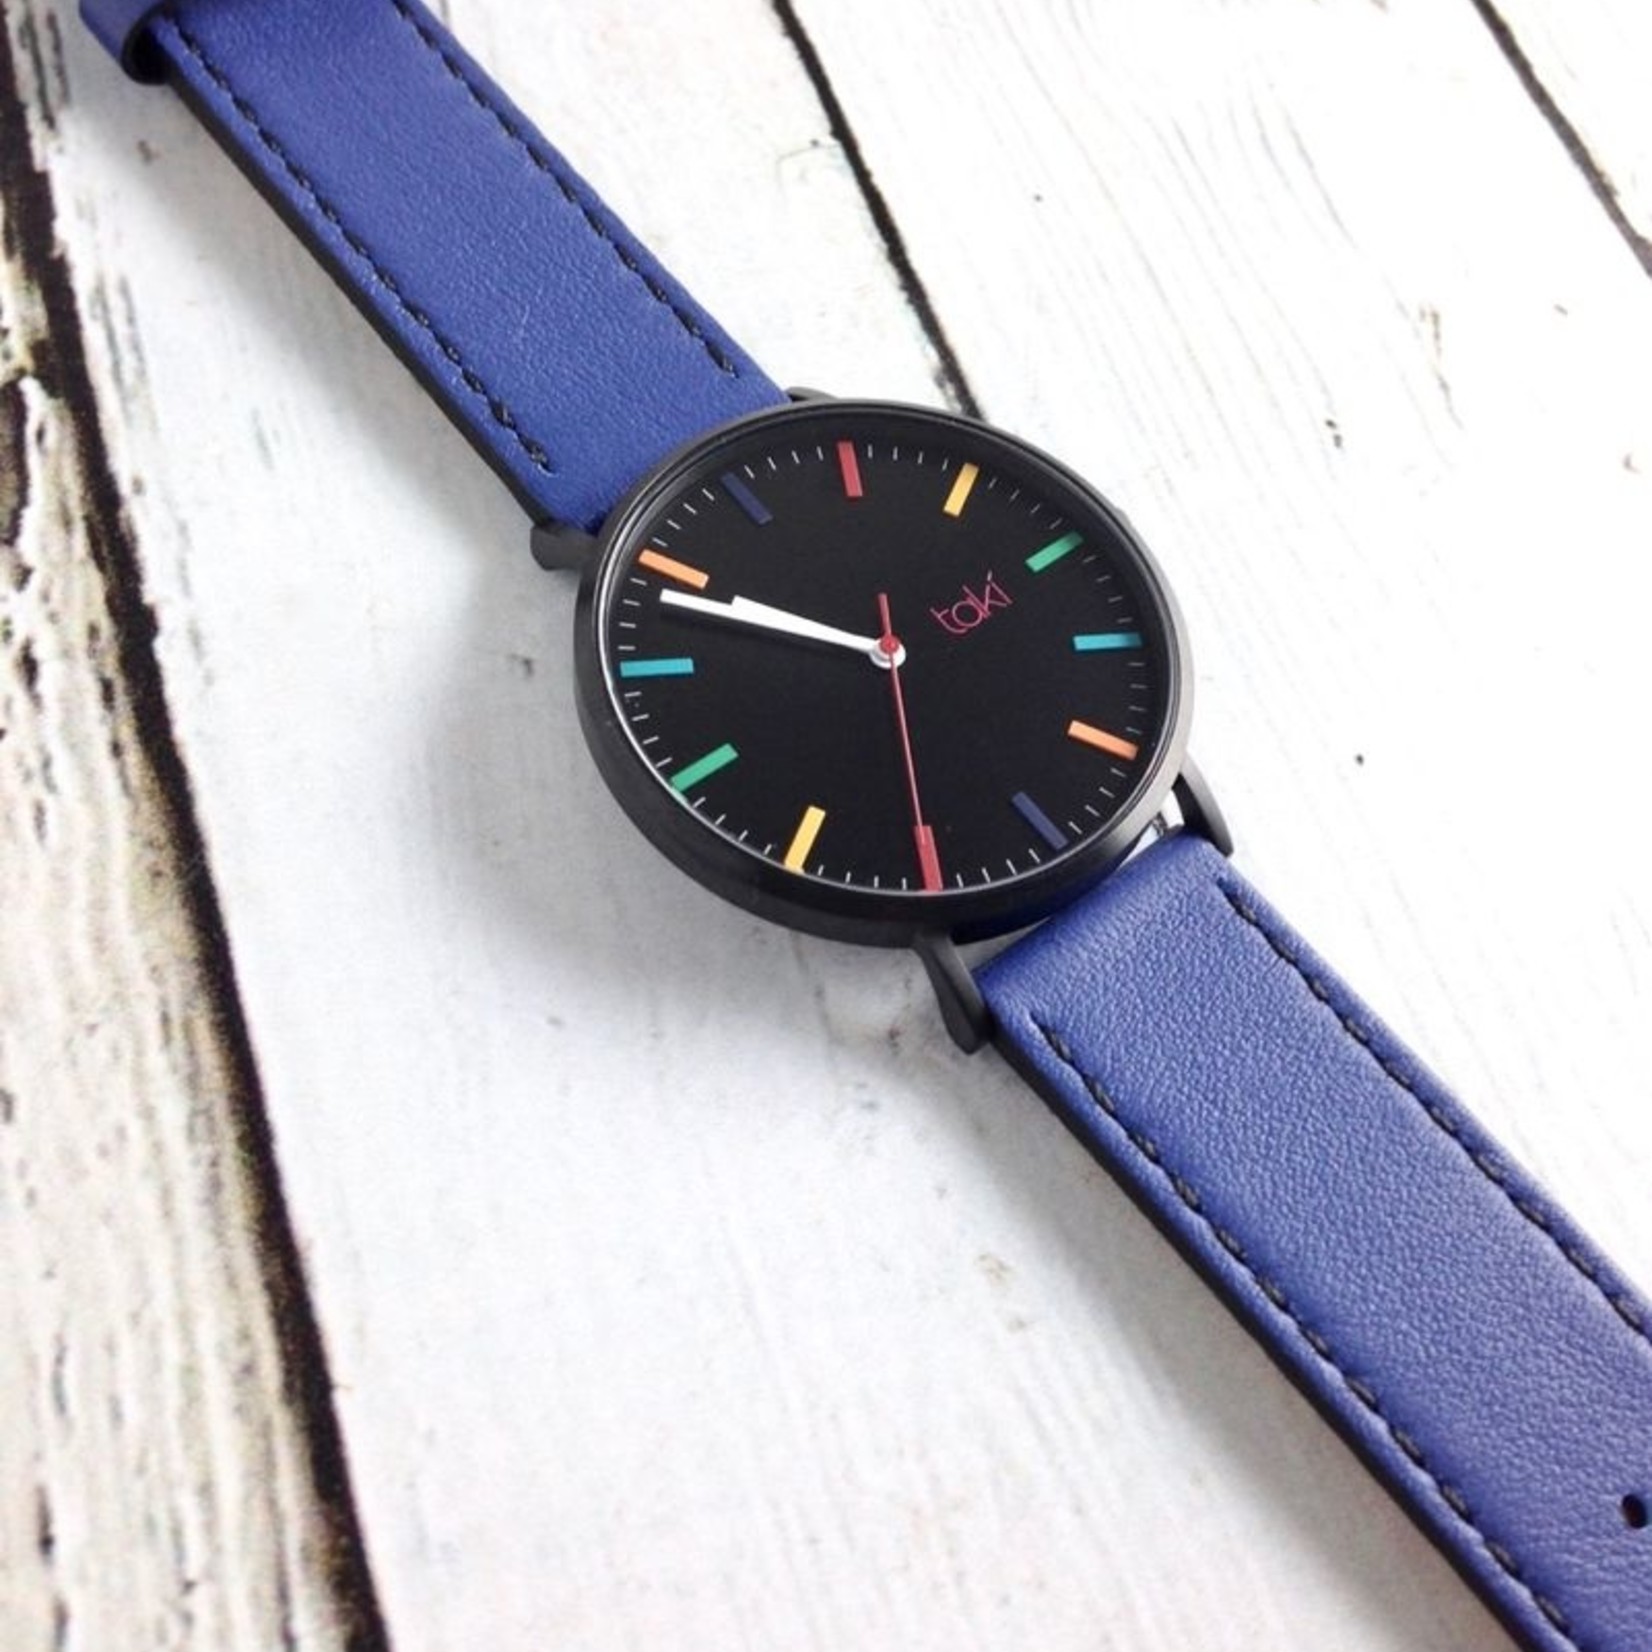 Linden Watch, Black Face and Royal Blue Band with a Rainbow of indicators